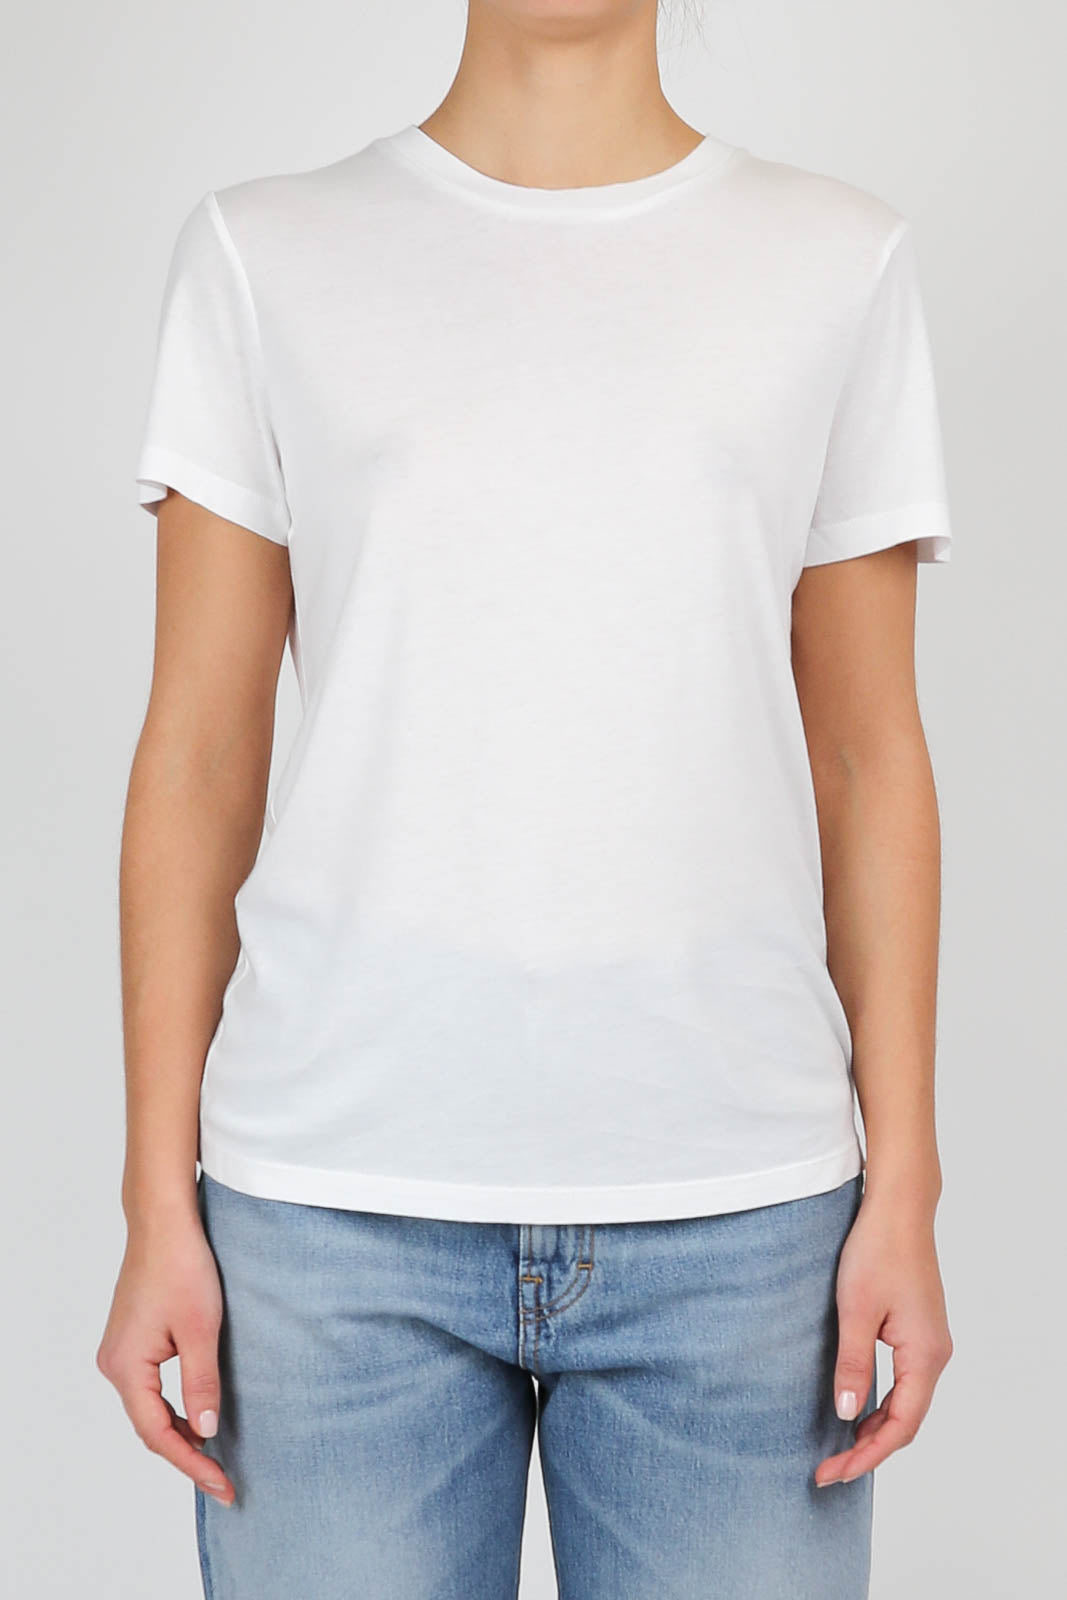 T-Shirt Annise in Weiss